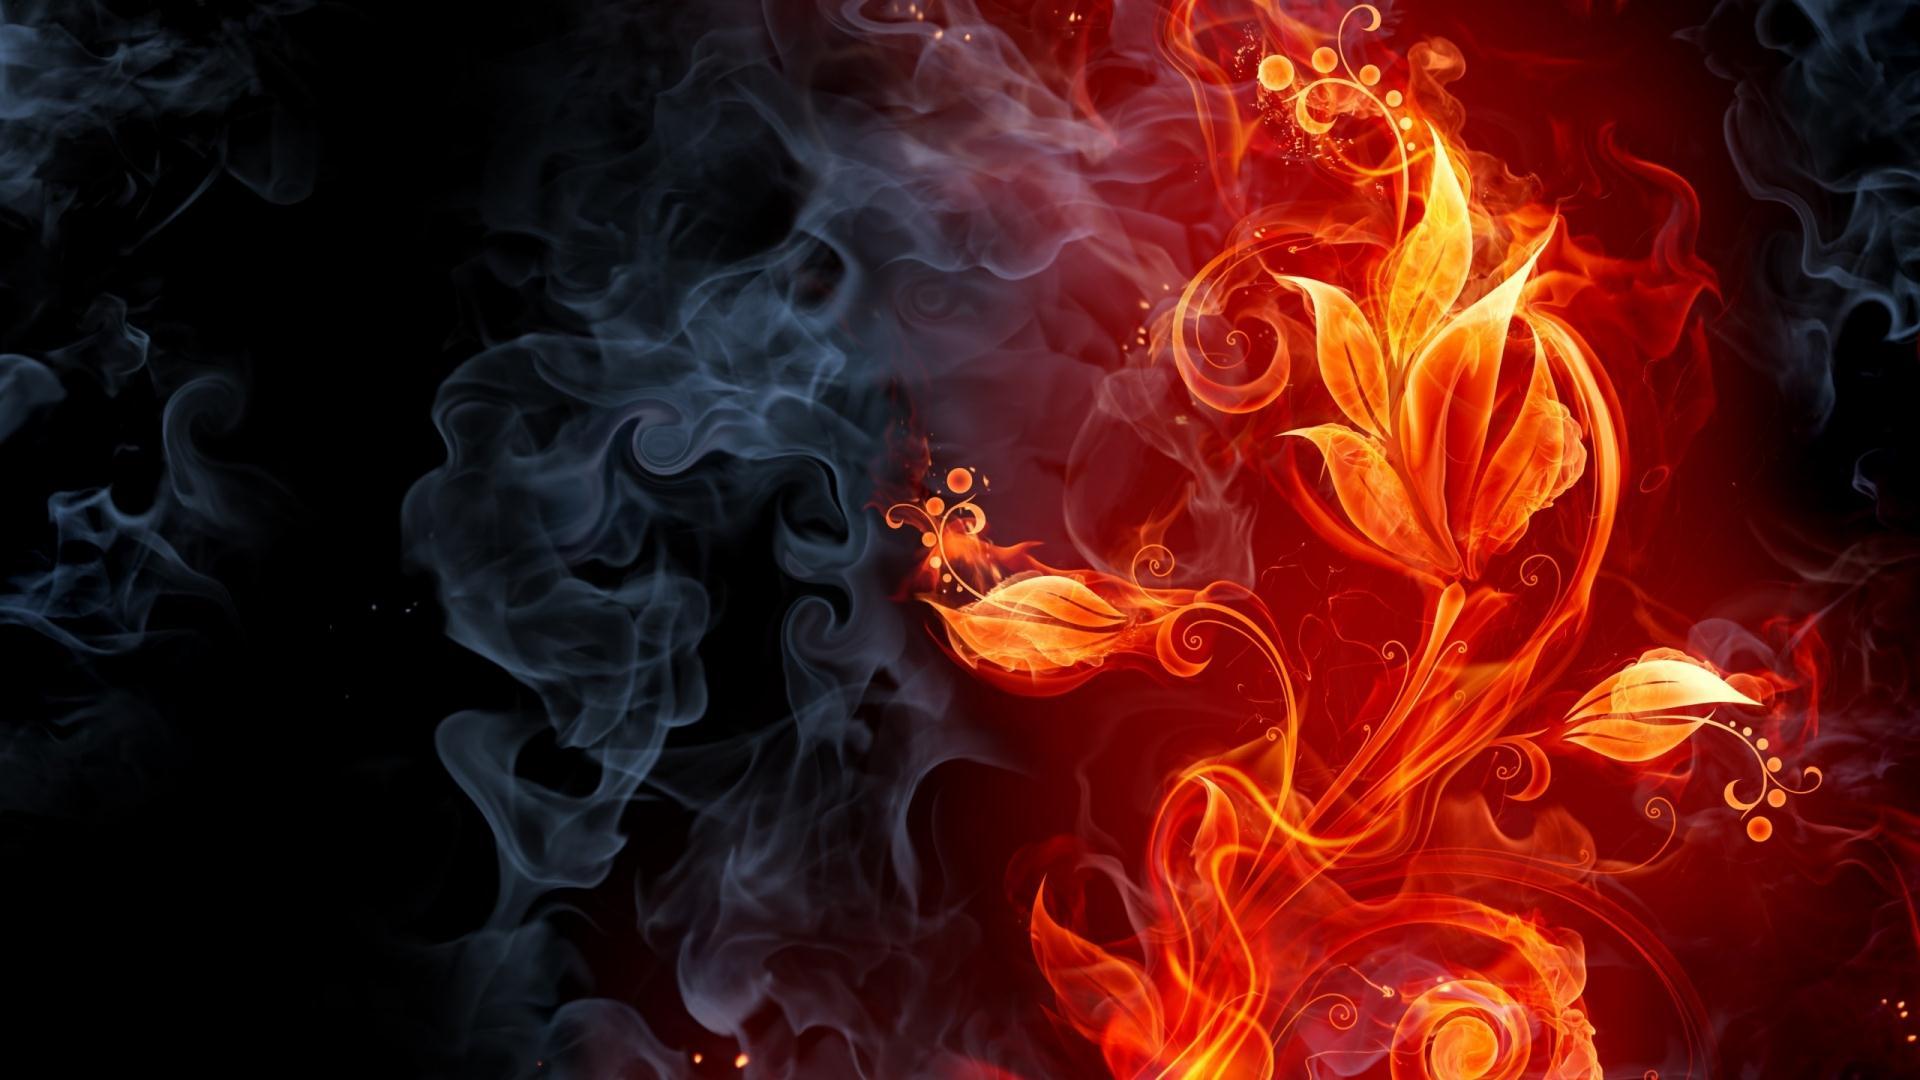 Fire Abstract Wallpaper, High Quality Pics of Fire Abstract in Nice